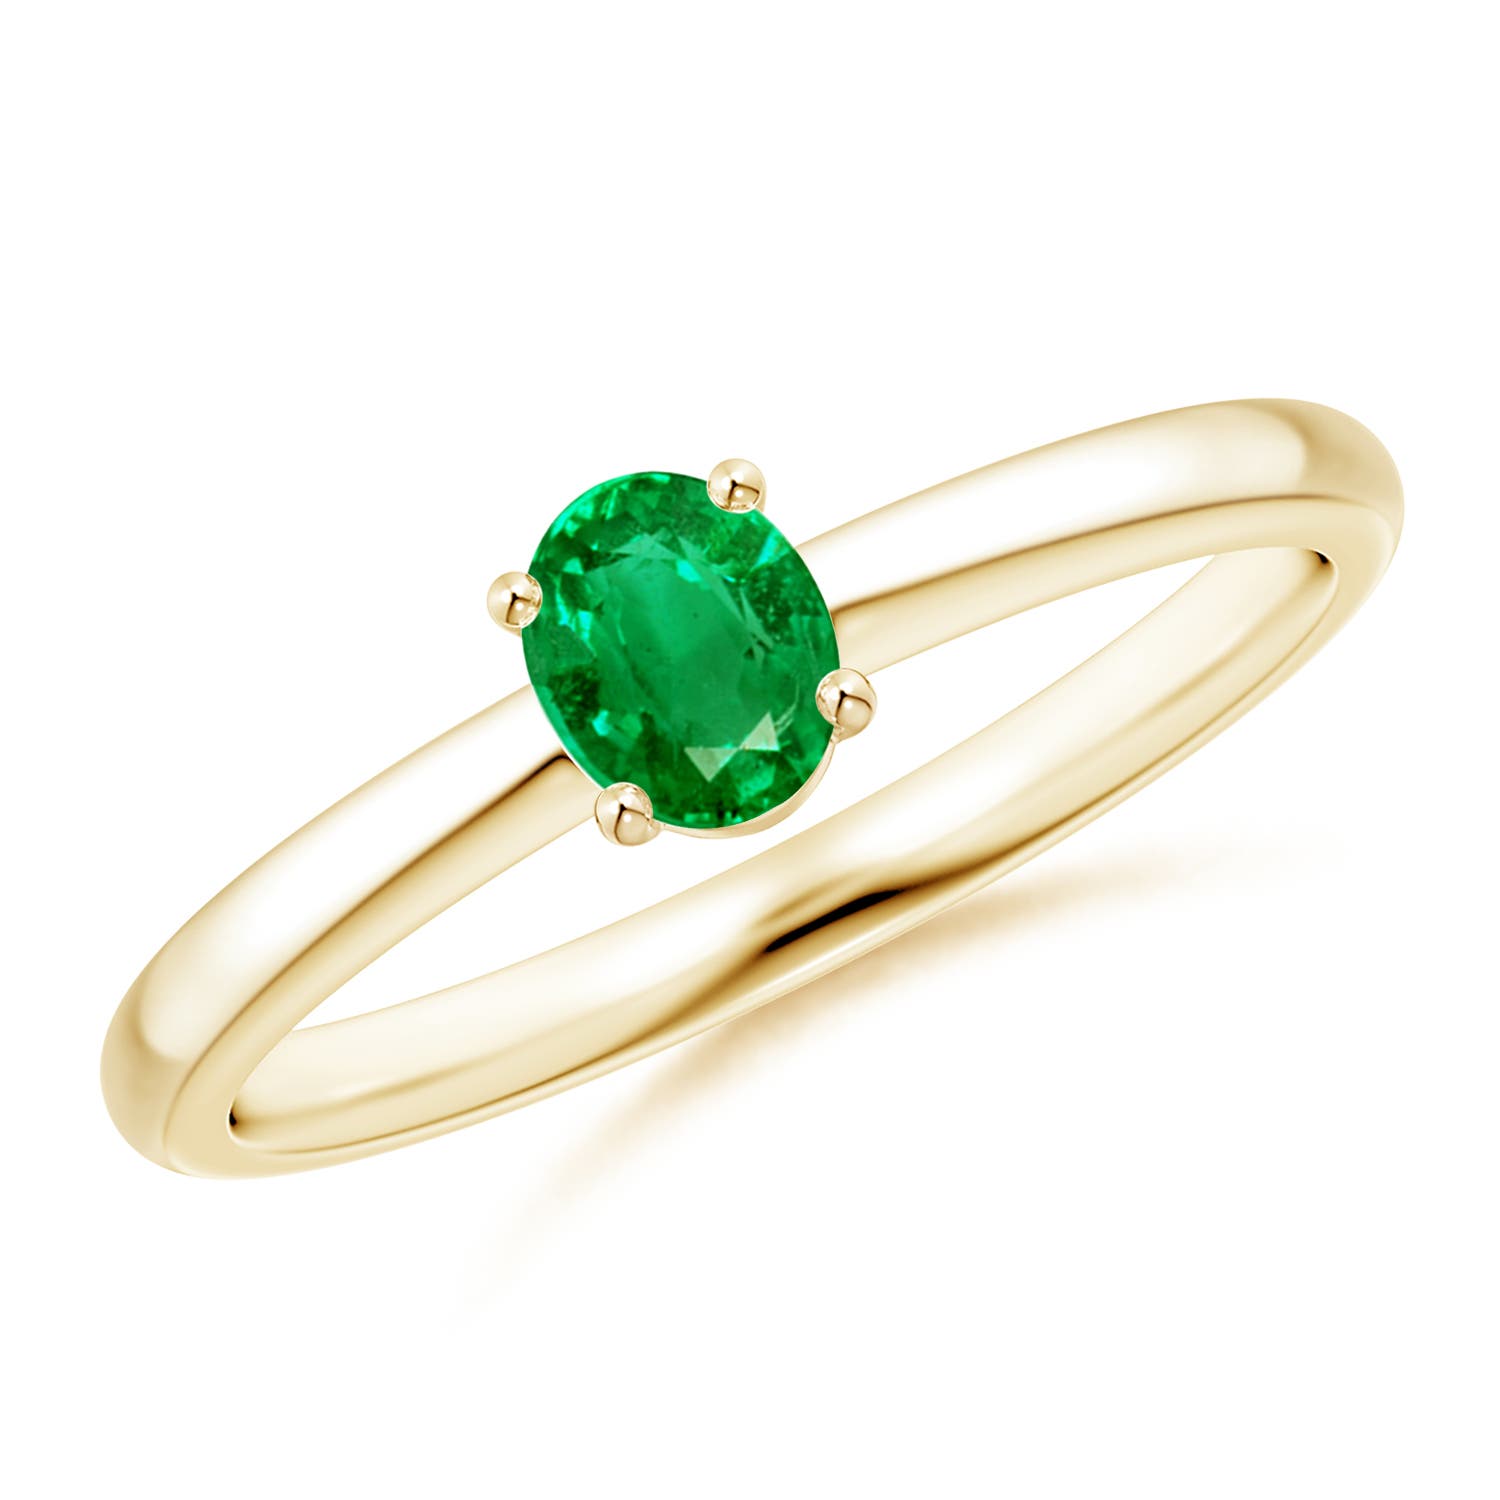 AAA - Emerald / 0.3 CT / 14 KT Yellow Gold